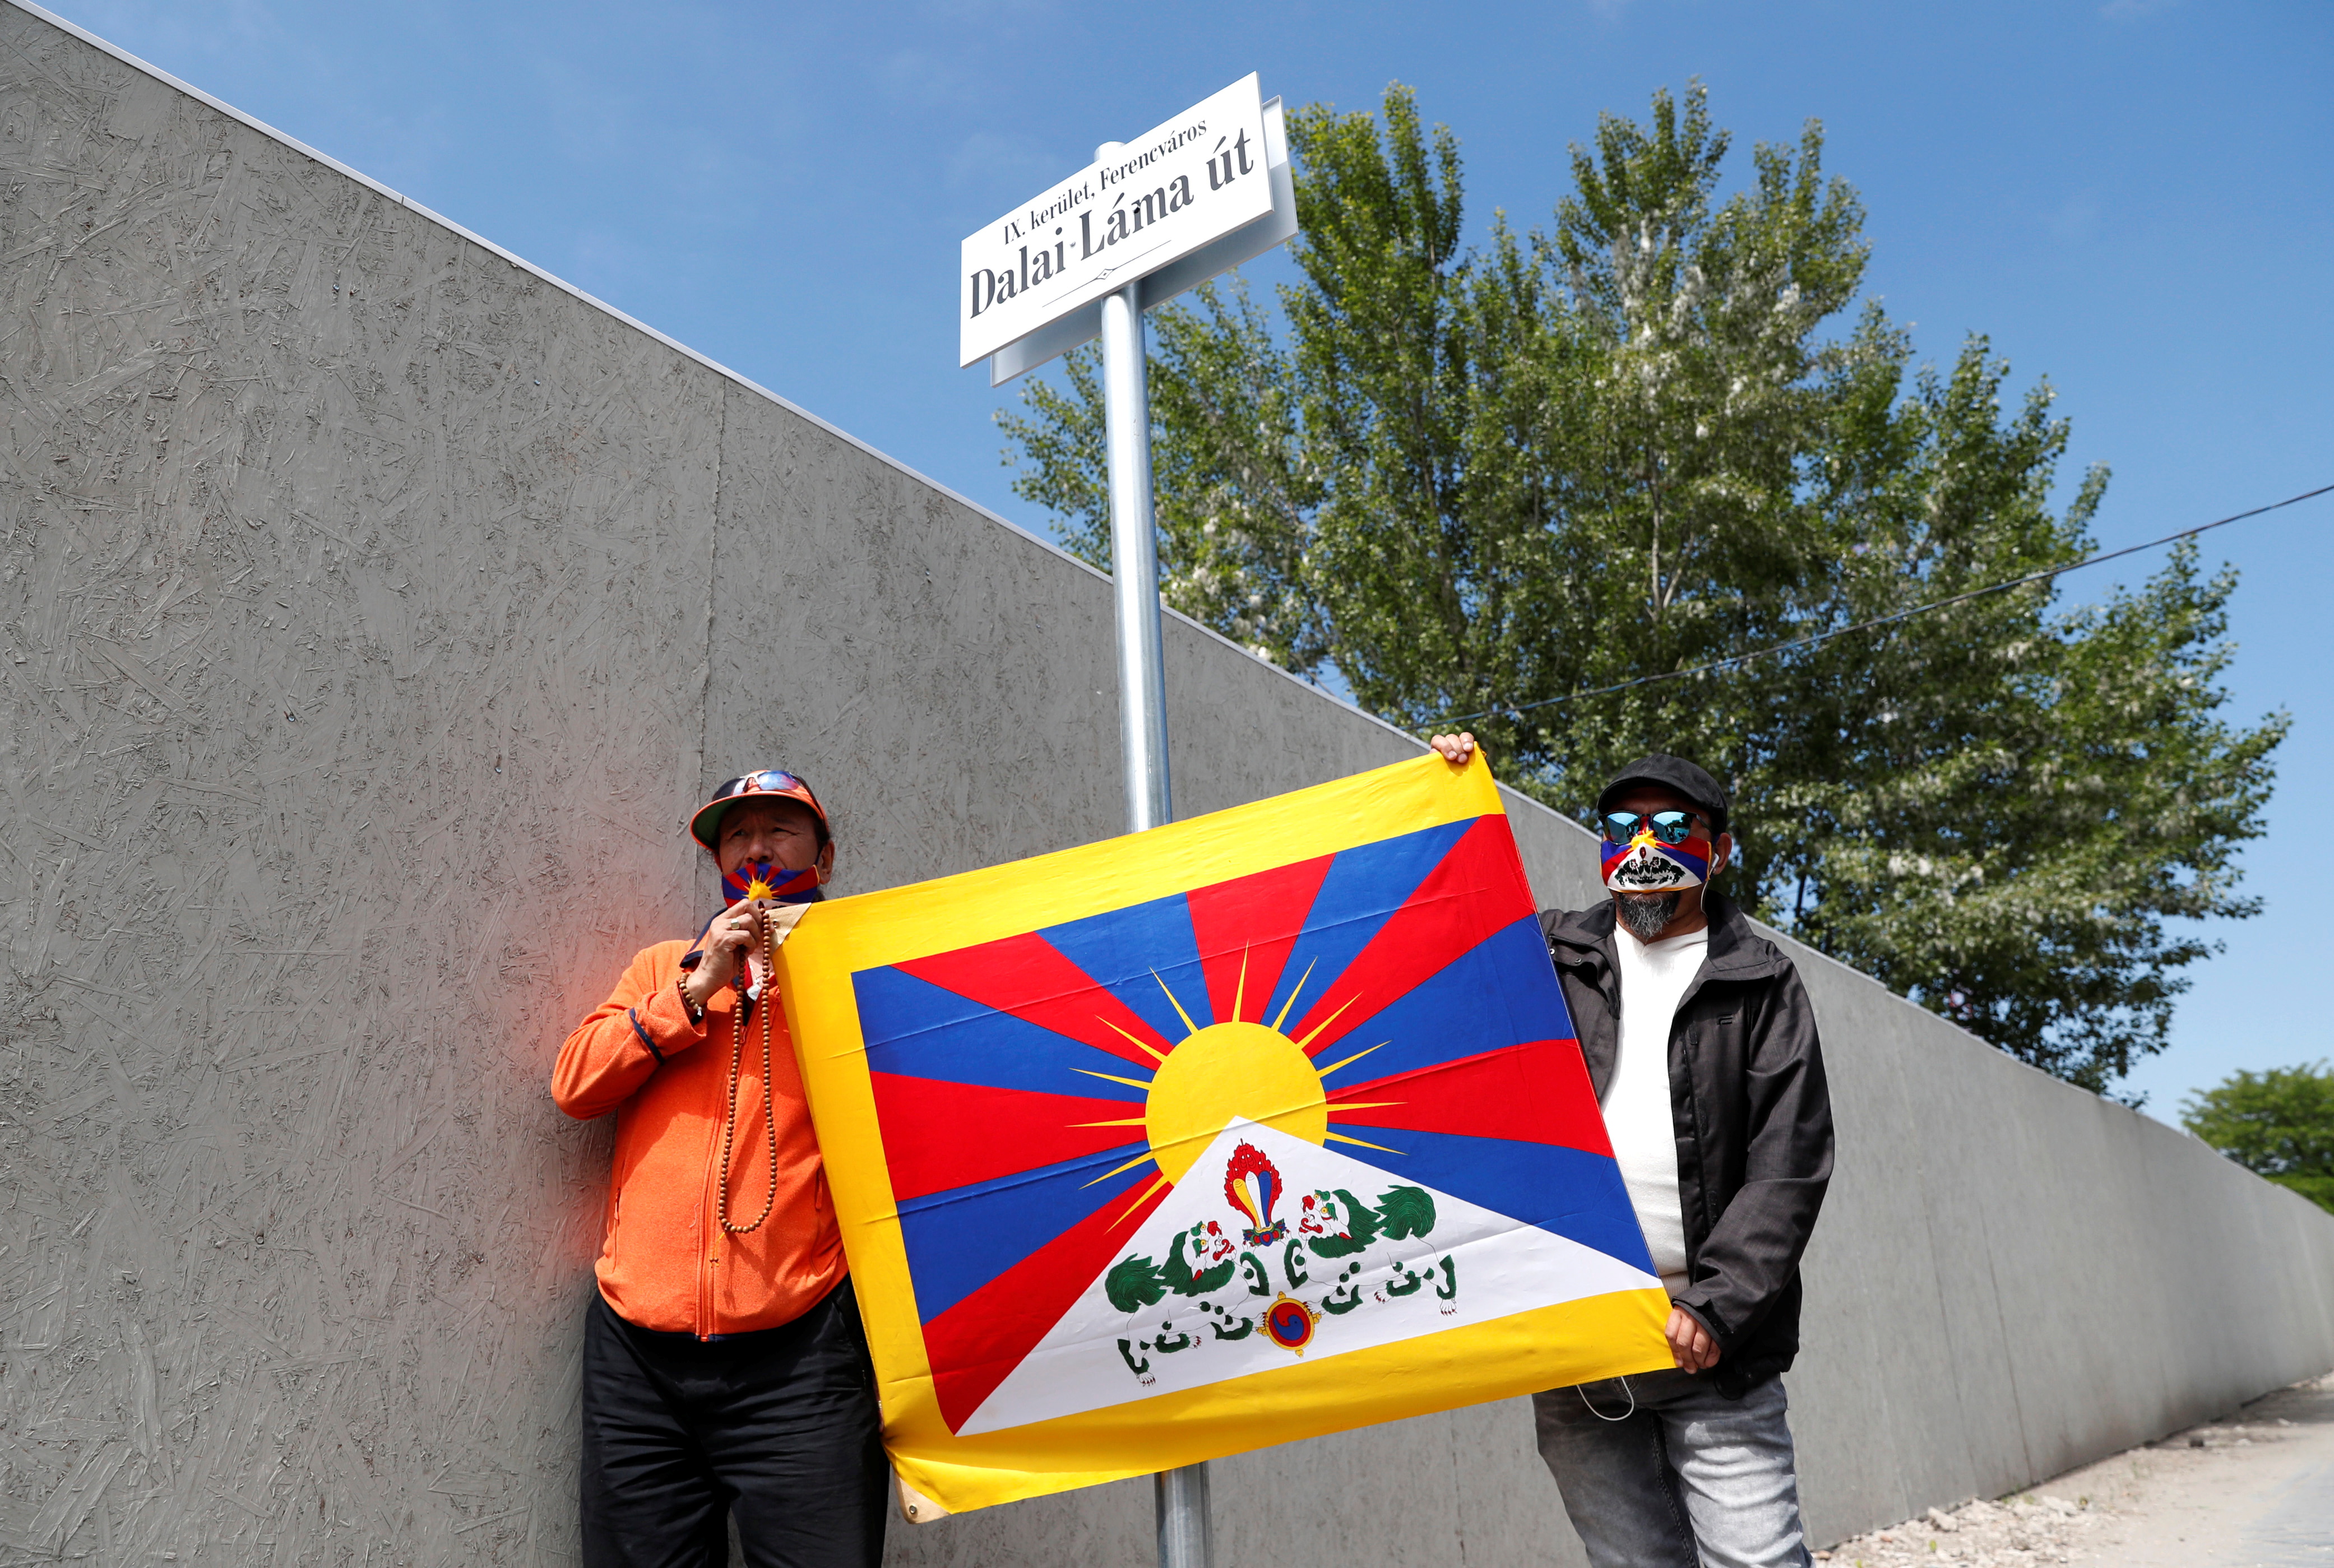 Activists hold a Tibetan flag next to a sign in a street renamed 'Dalai Lama', near the planned site of the campus of Chinese Fudan University in Budapest